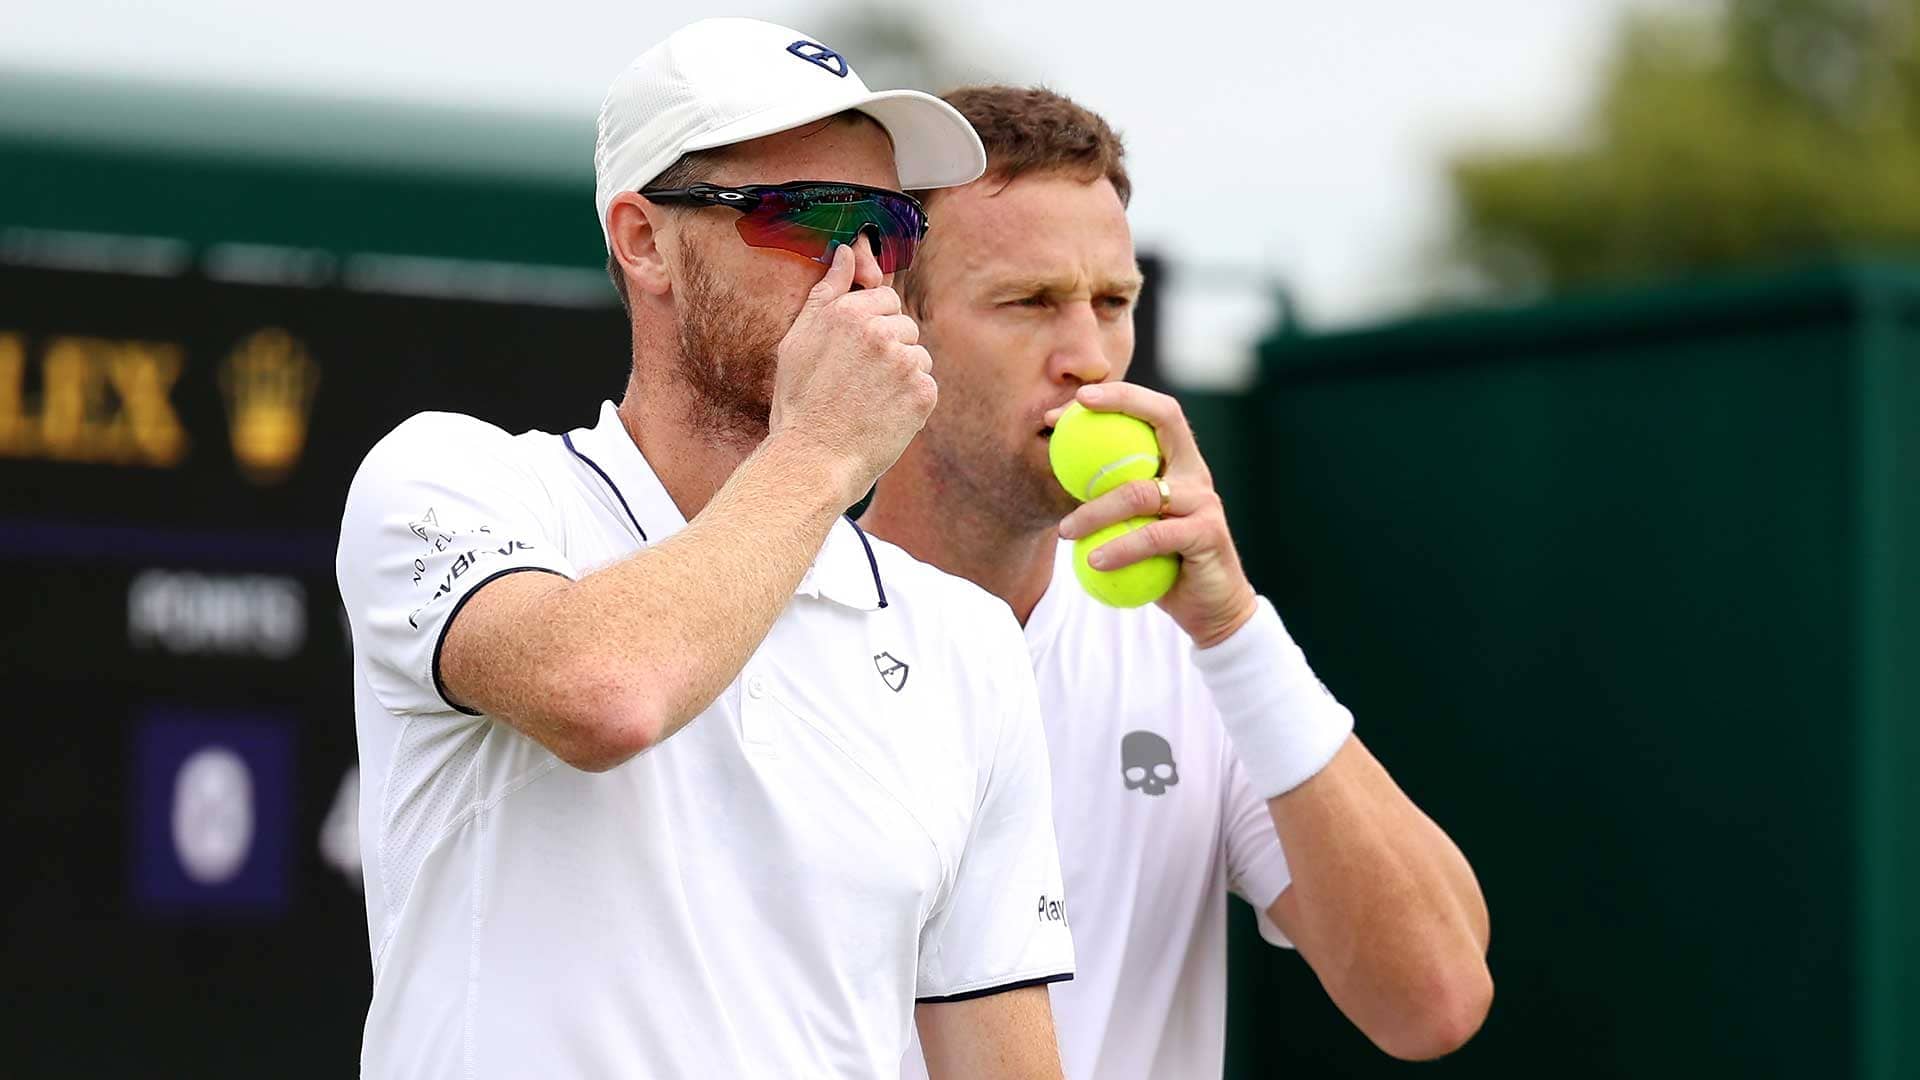 Jamie Murray and Michael Venus plot their route to second-round victory on Sunday at Wimbledon.